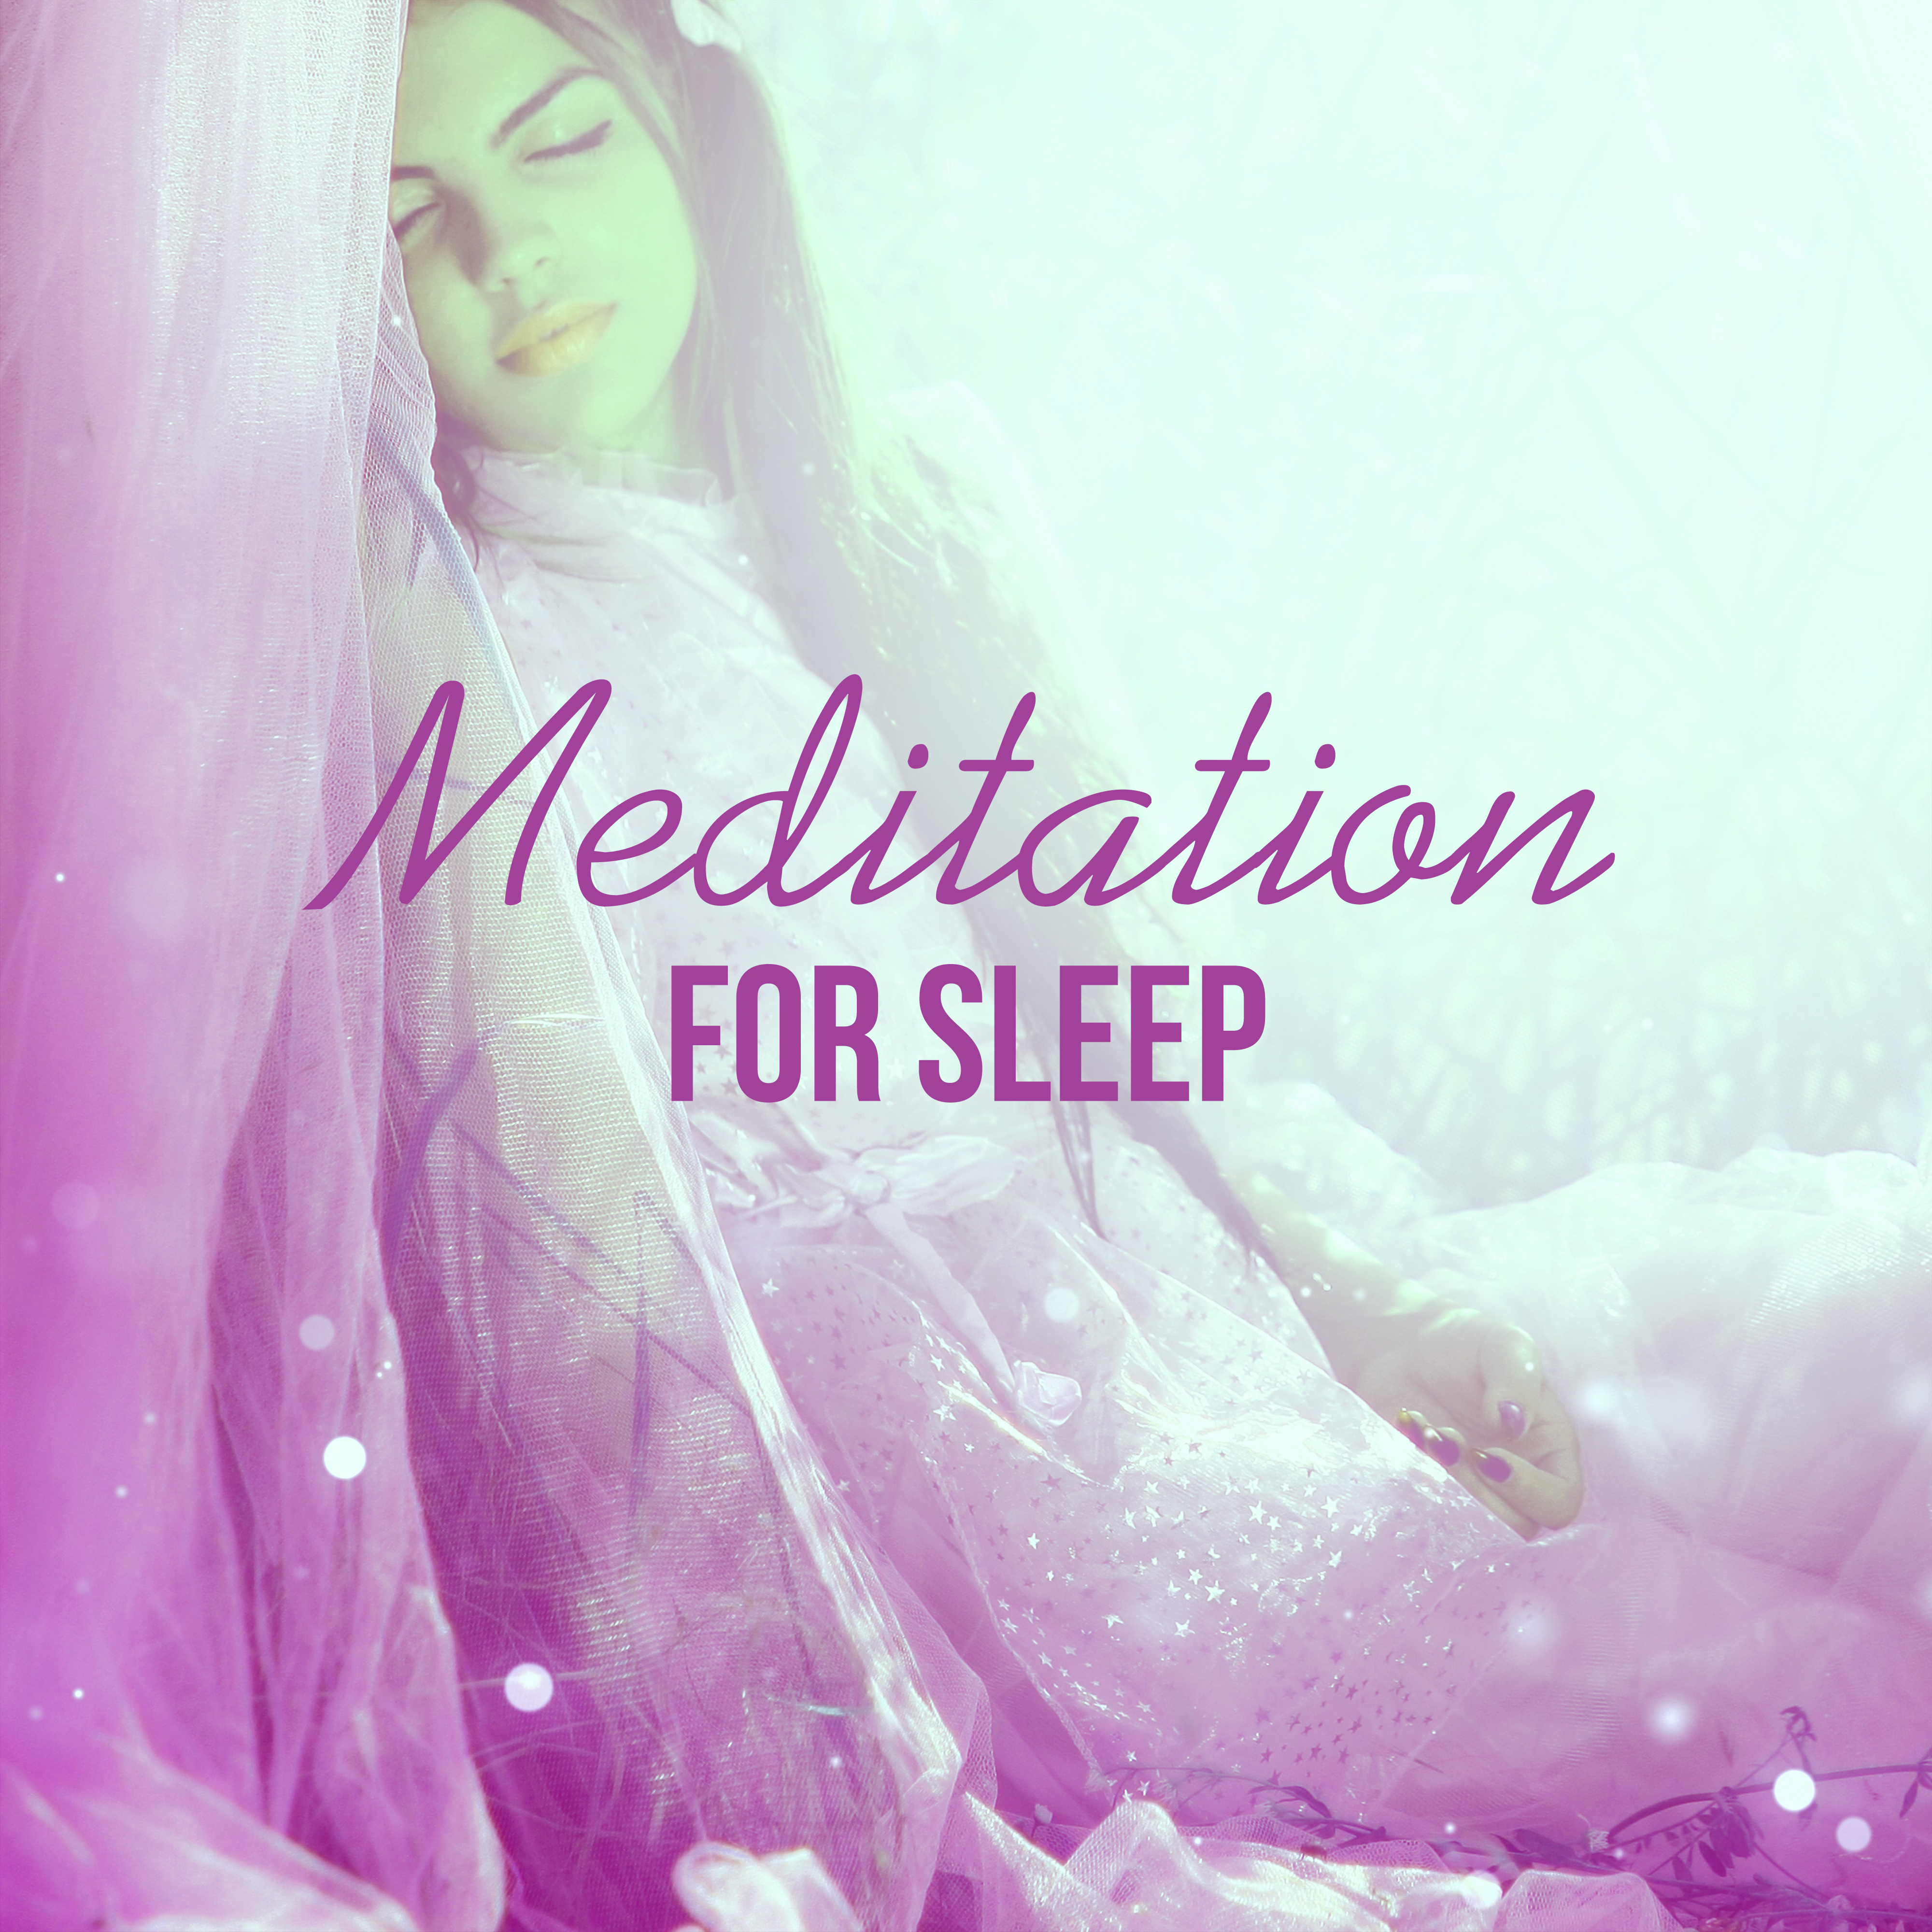 Meditation for Sleep  Calming Sounds of Nature for Relax Before Sleep, Sleep Music, Meditation